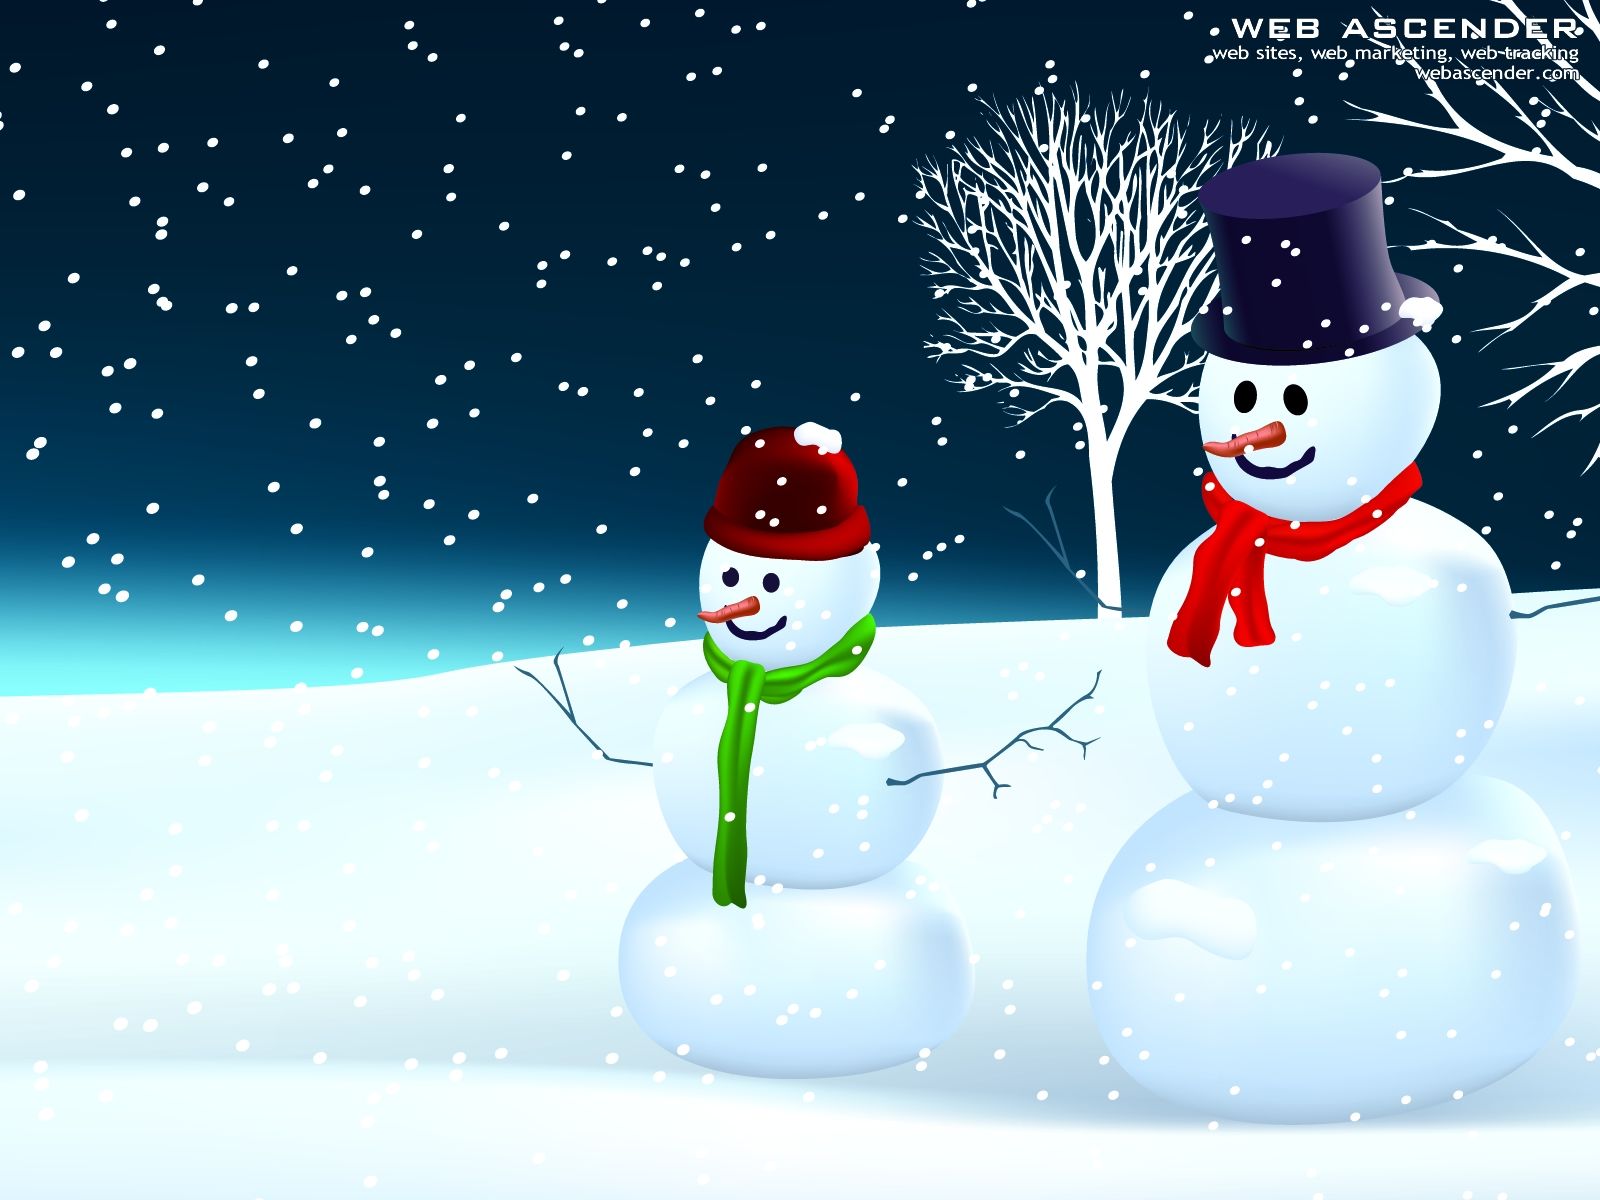 New 2013 Funny snowman wallpaper for Windows 8 | All for Windows ...